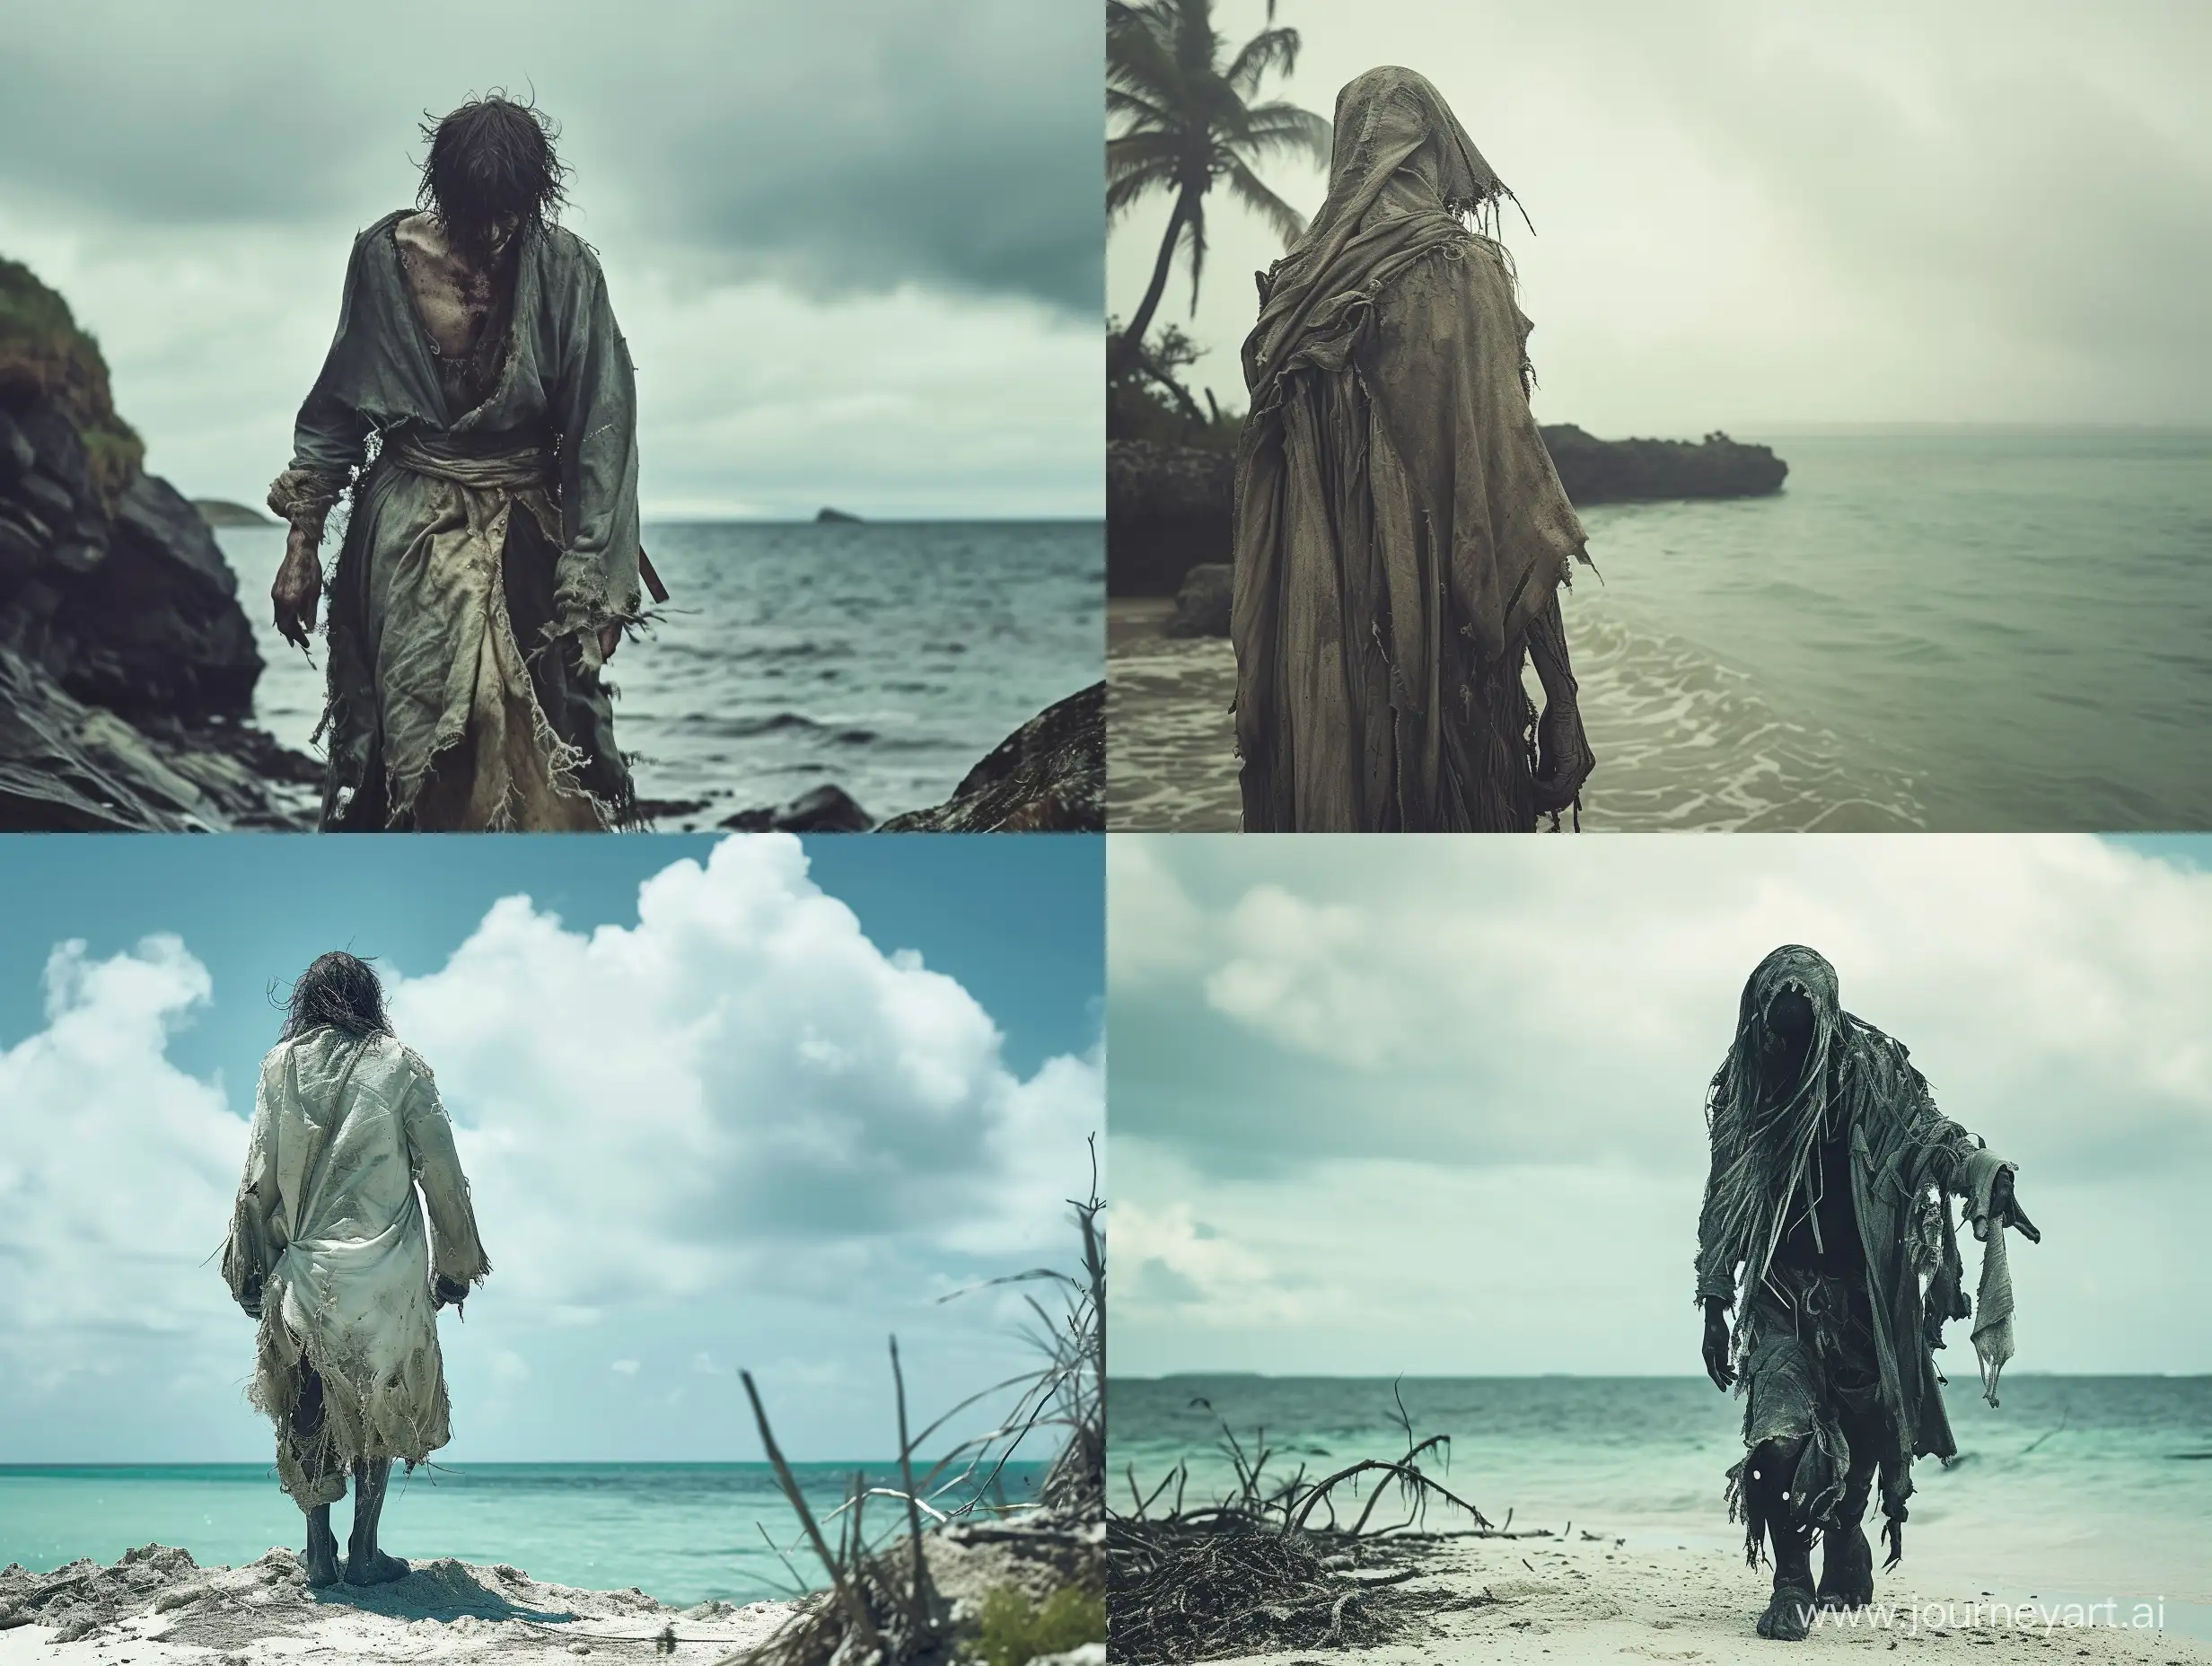 Survivor-on-an-Uninhabited-Island-in-Tattered-Clothes